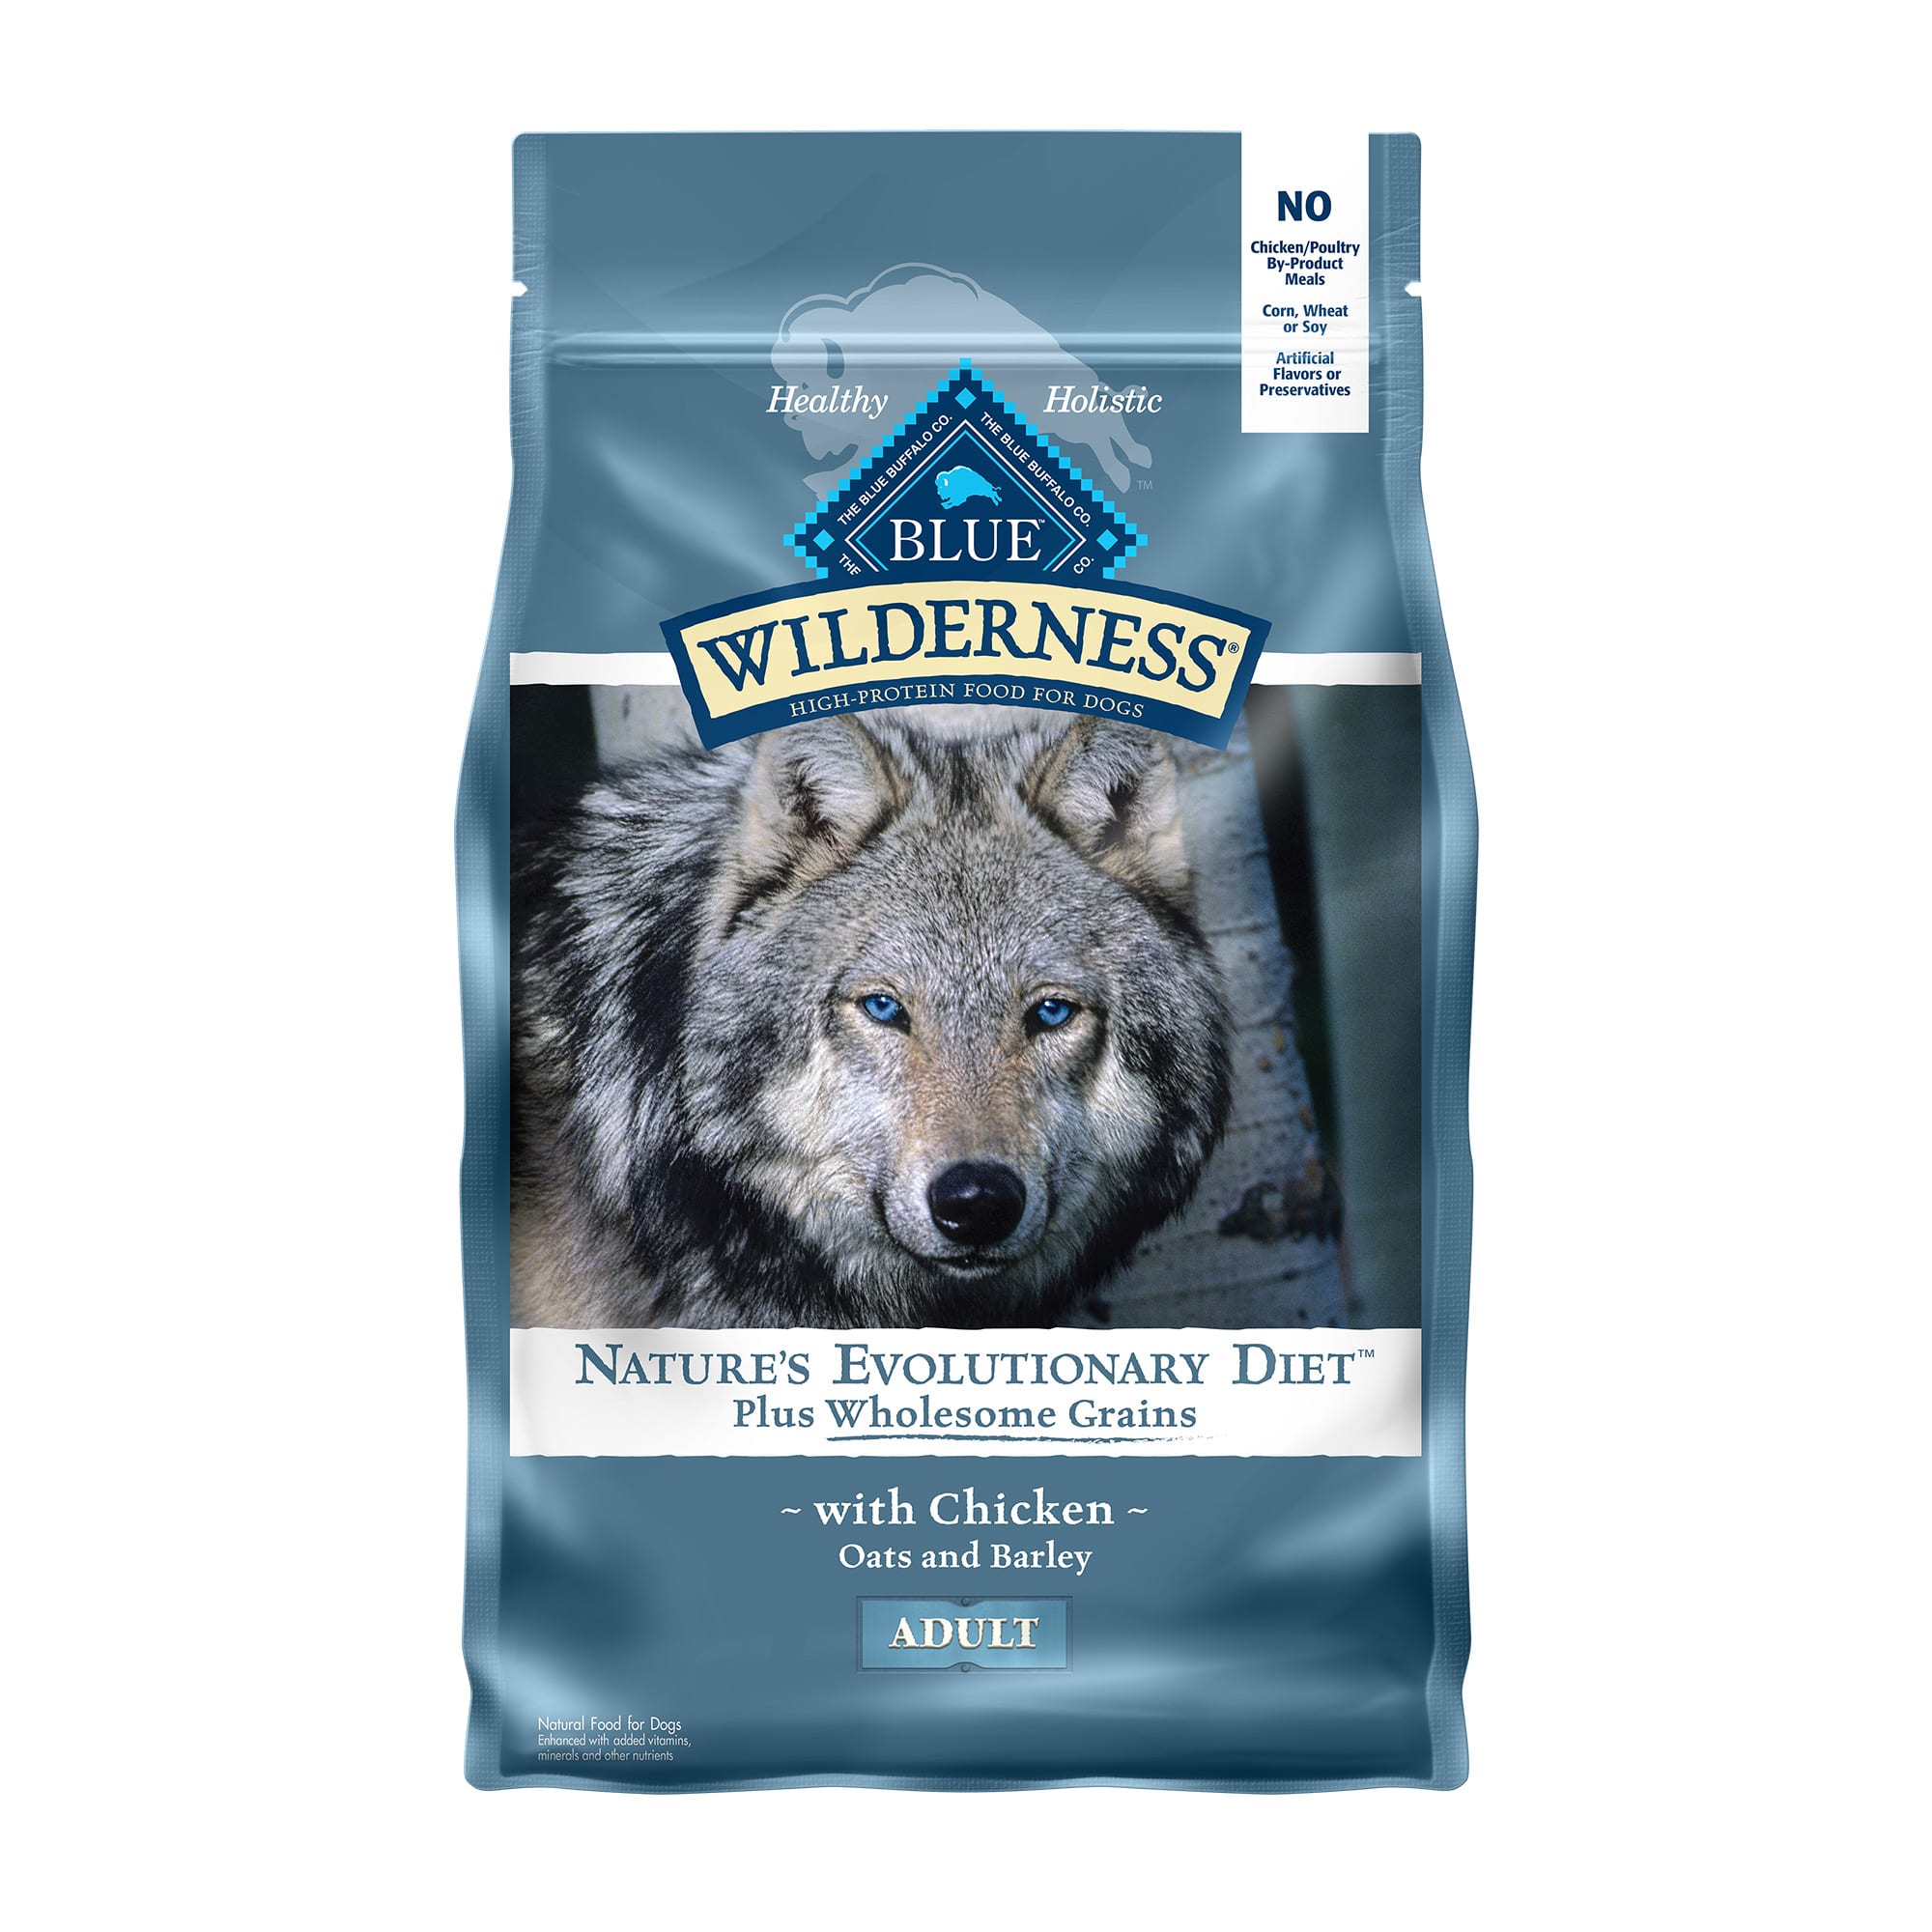 Blue Buffalo Blue Wilderness plus Wholesome Grains High Protein Natural Adult Chicken Dry Dog Food, 4.5 lbs.